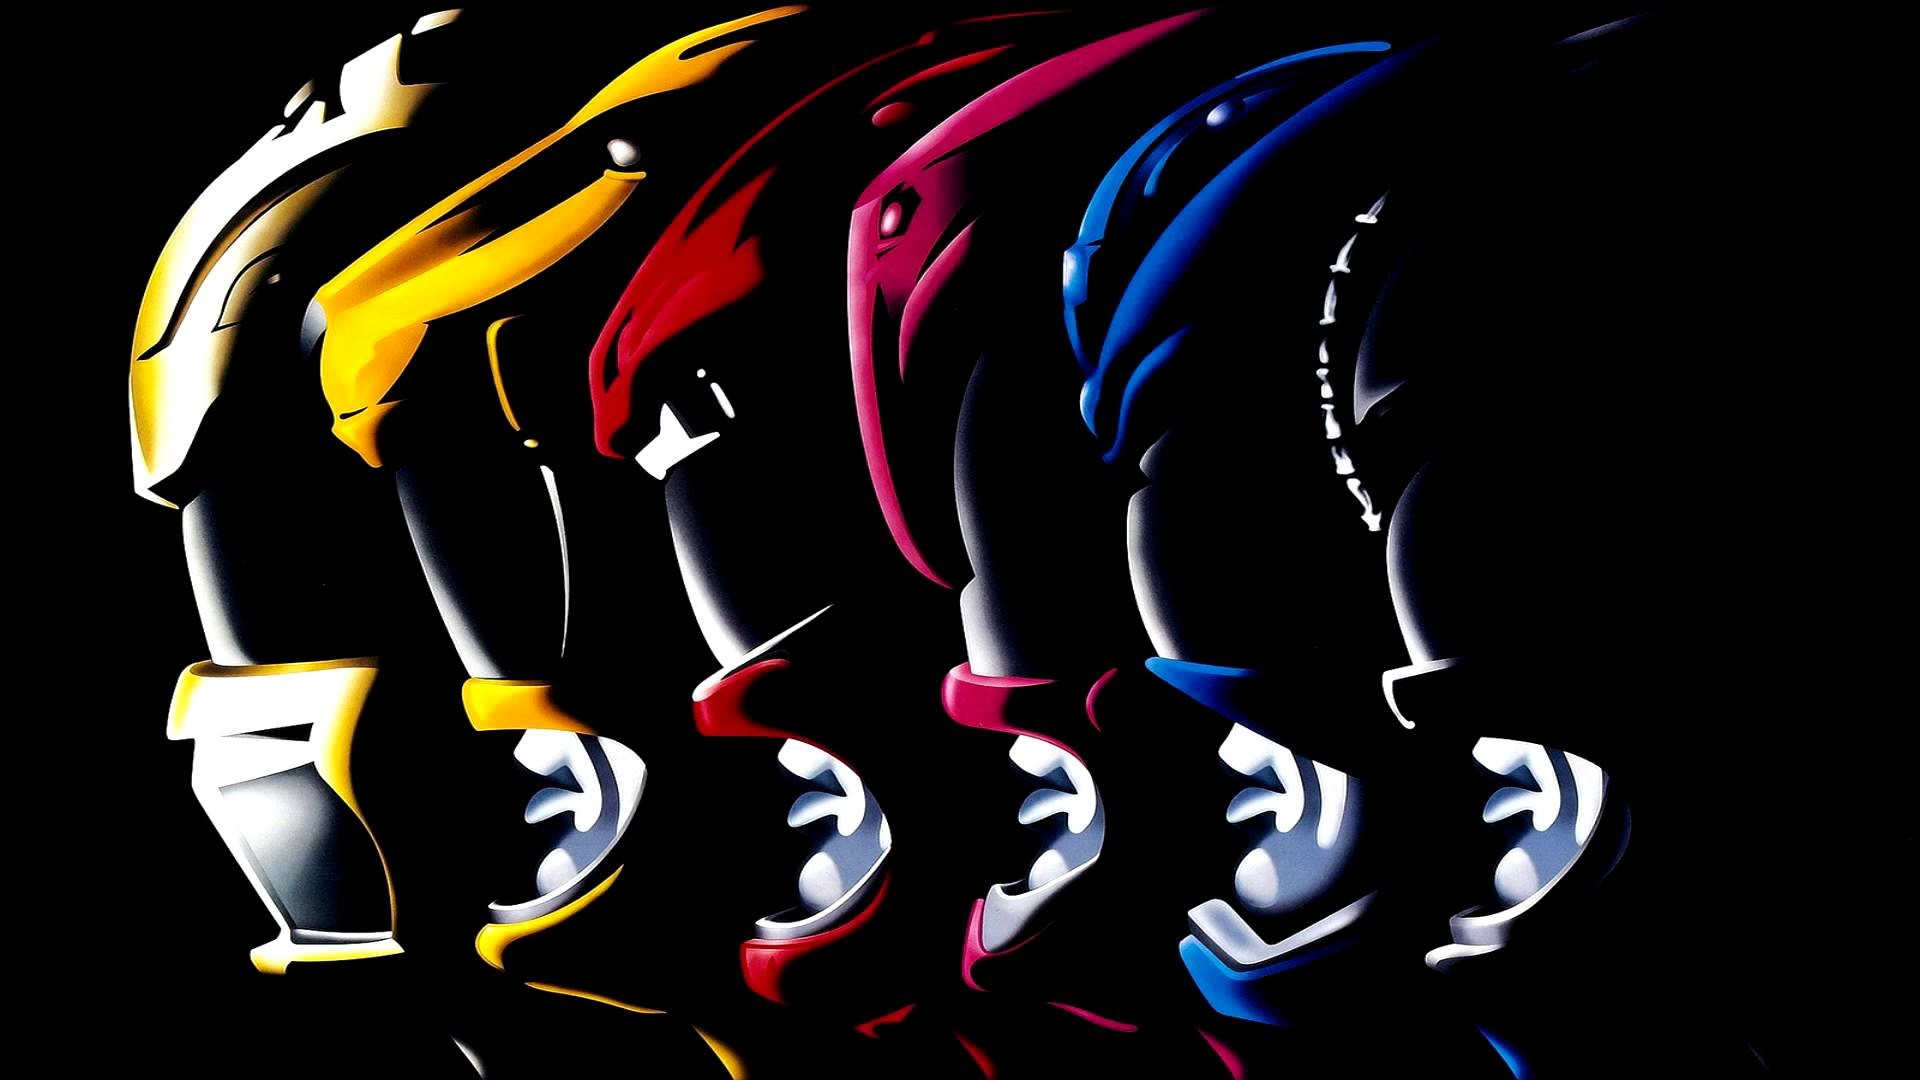 1920x1080 This Power Rangers Movie Synopsis Sounds Stupid Rangers Wallpaper Bedroom. Rangers  Wallpaper Bedroom doehl us